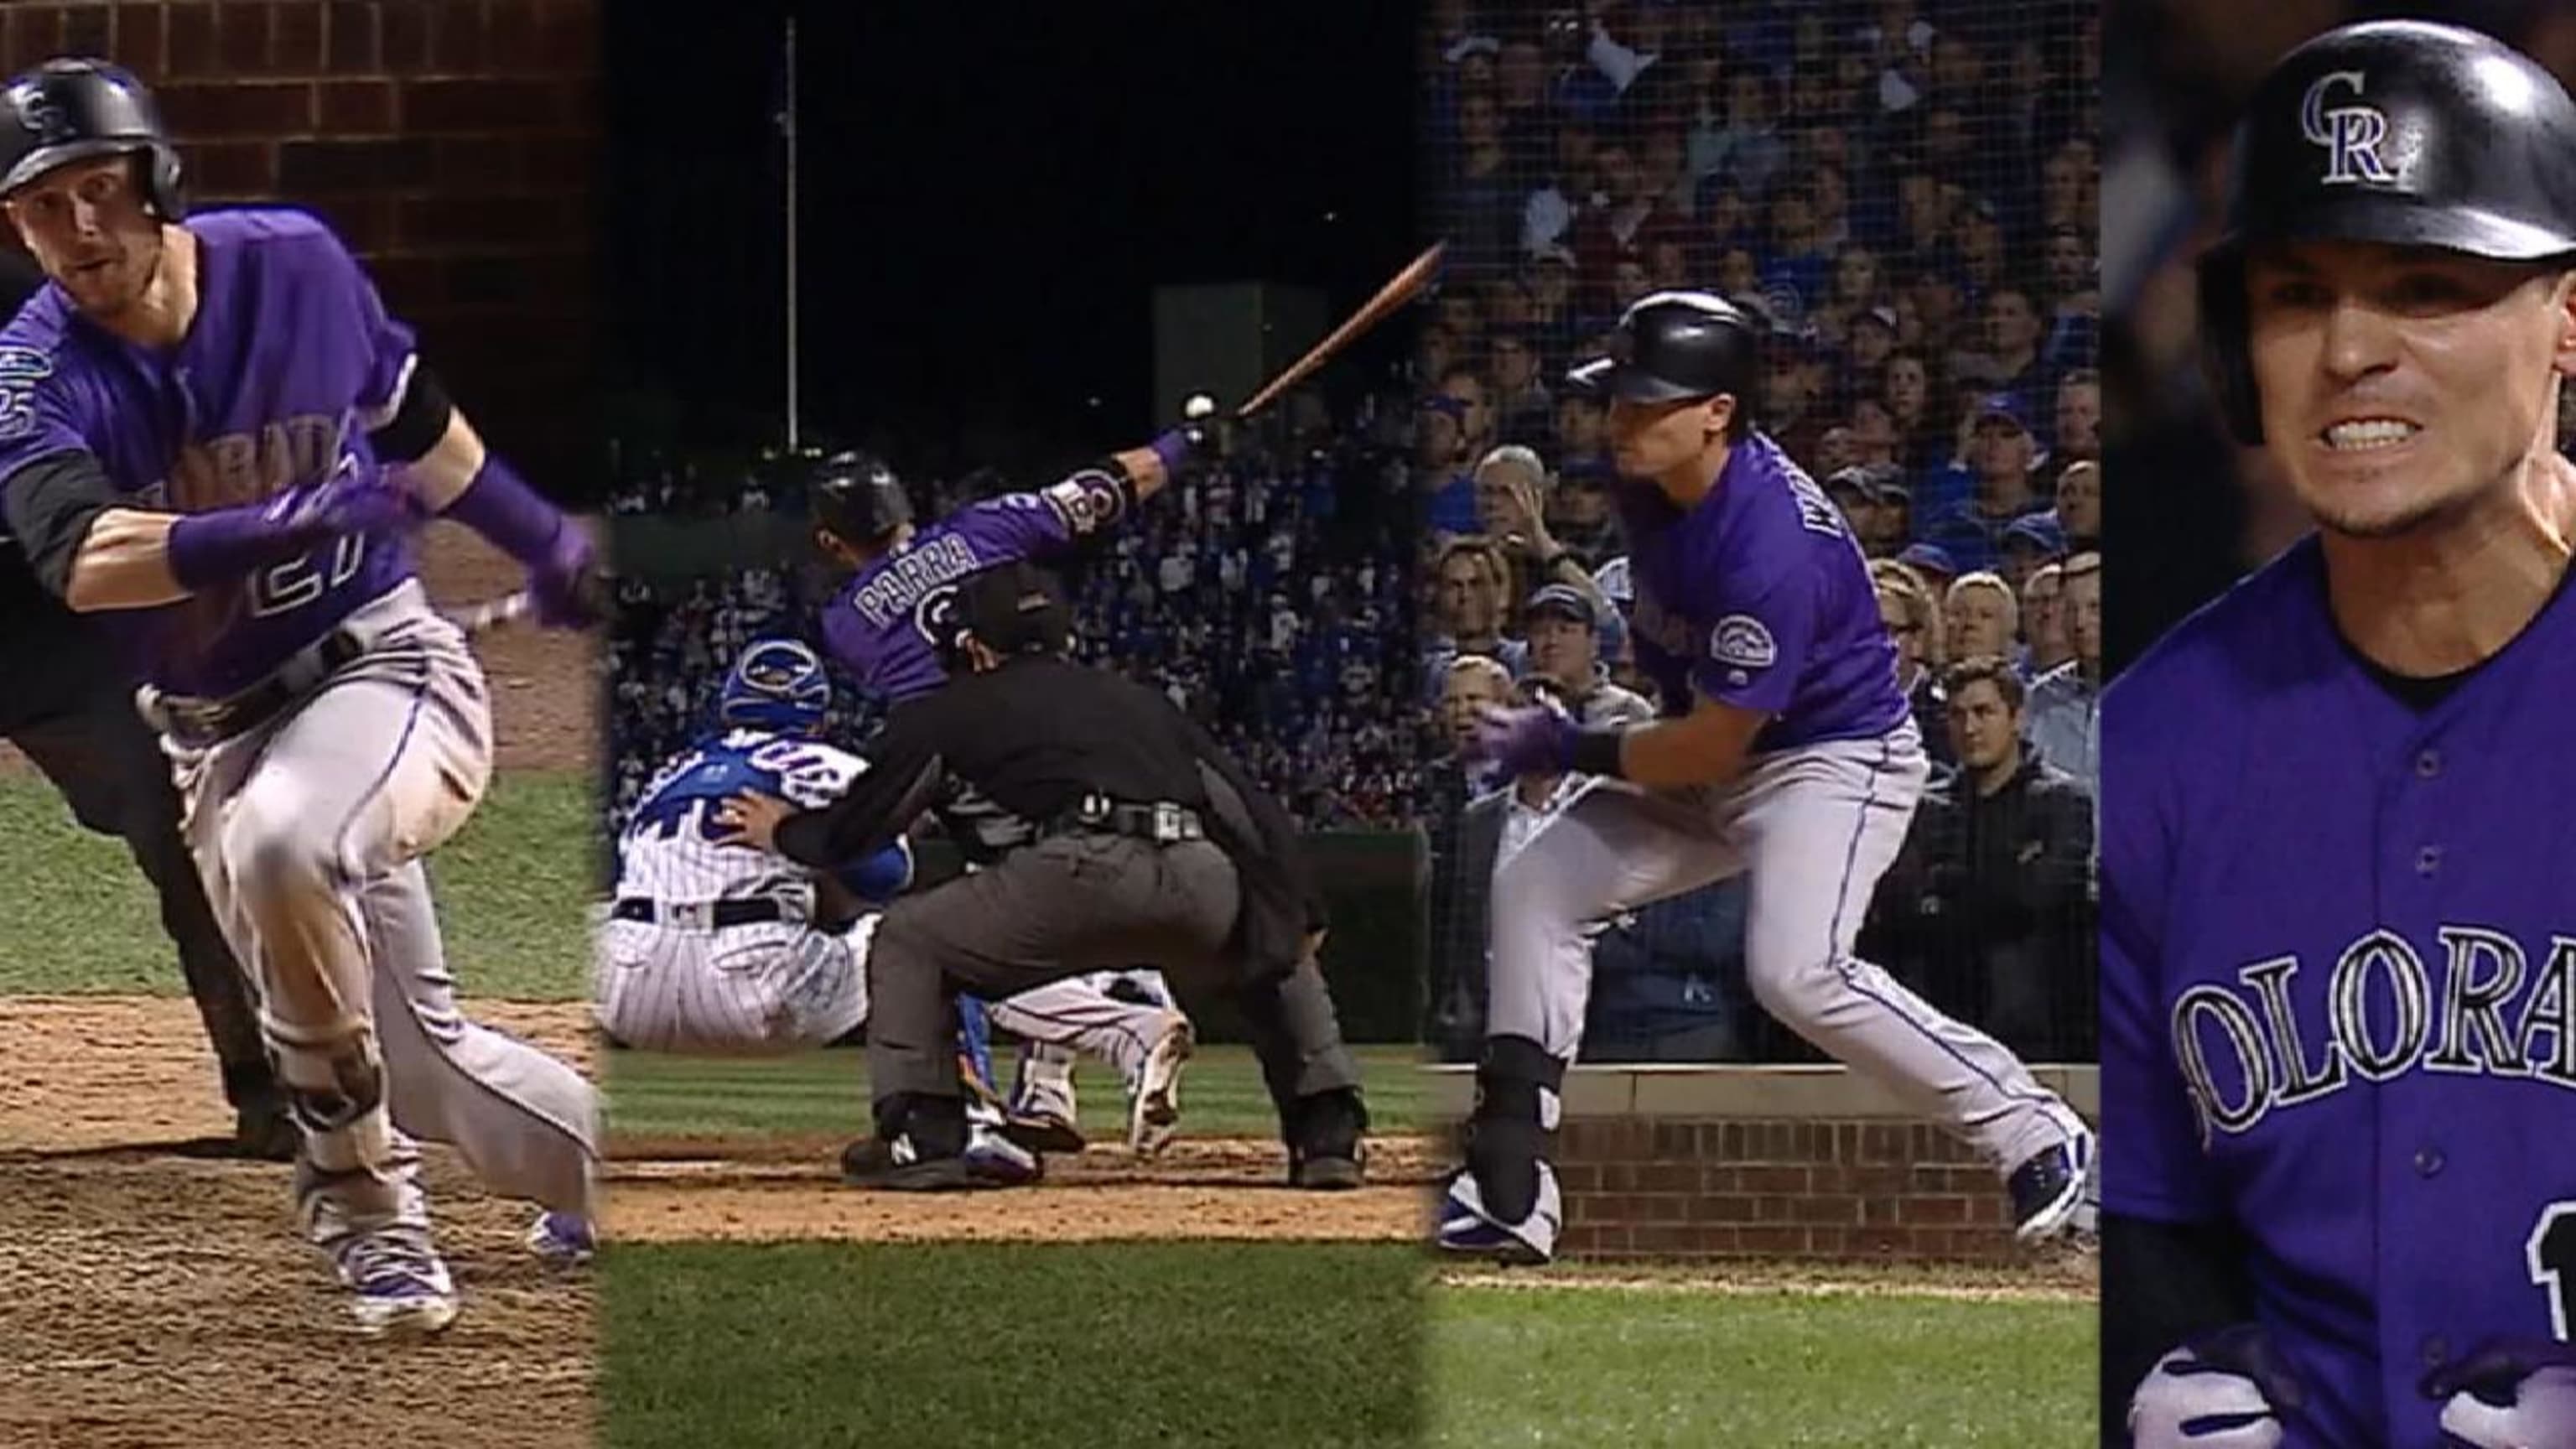 Rockies catcher Tony Wolters knocked the cover off the baseball